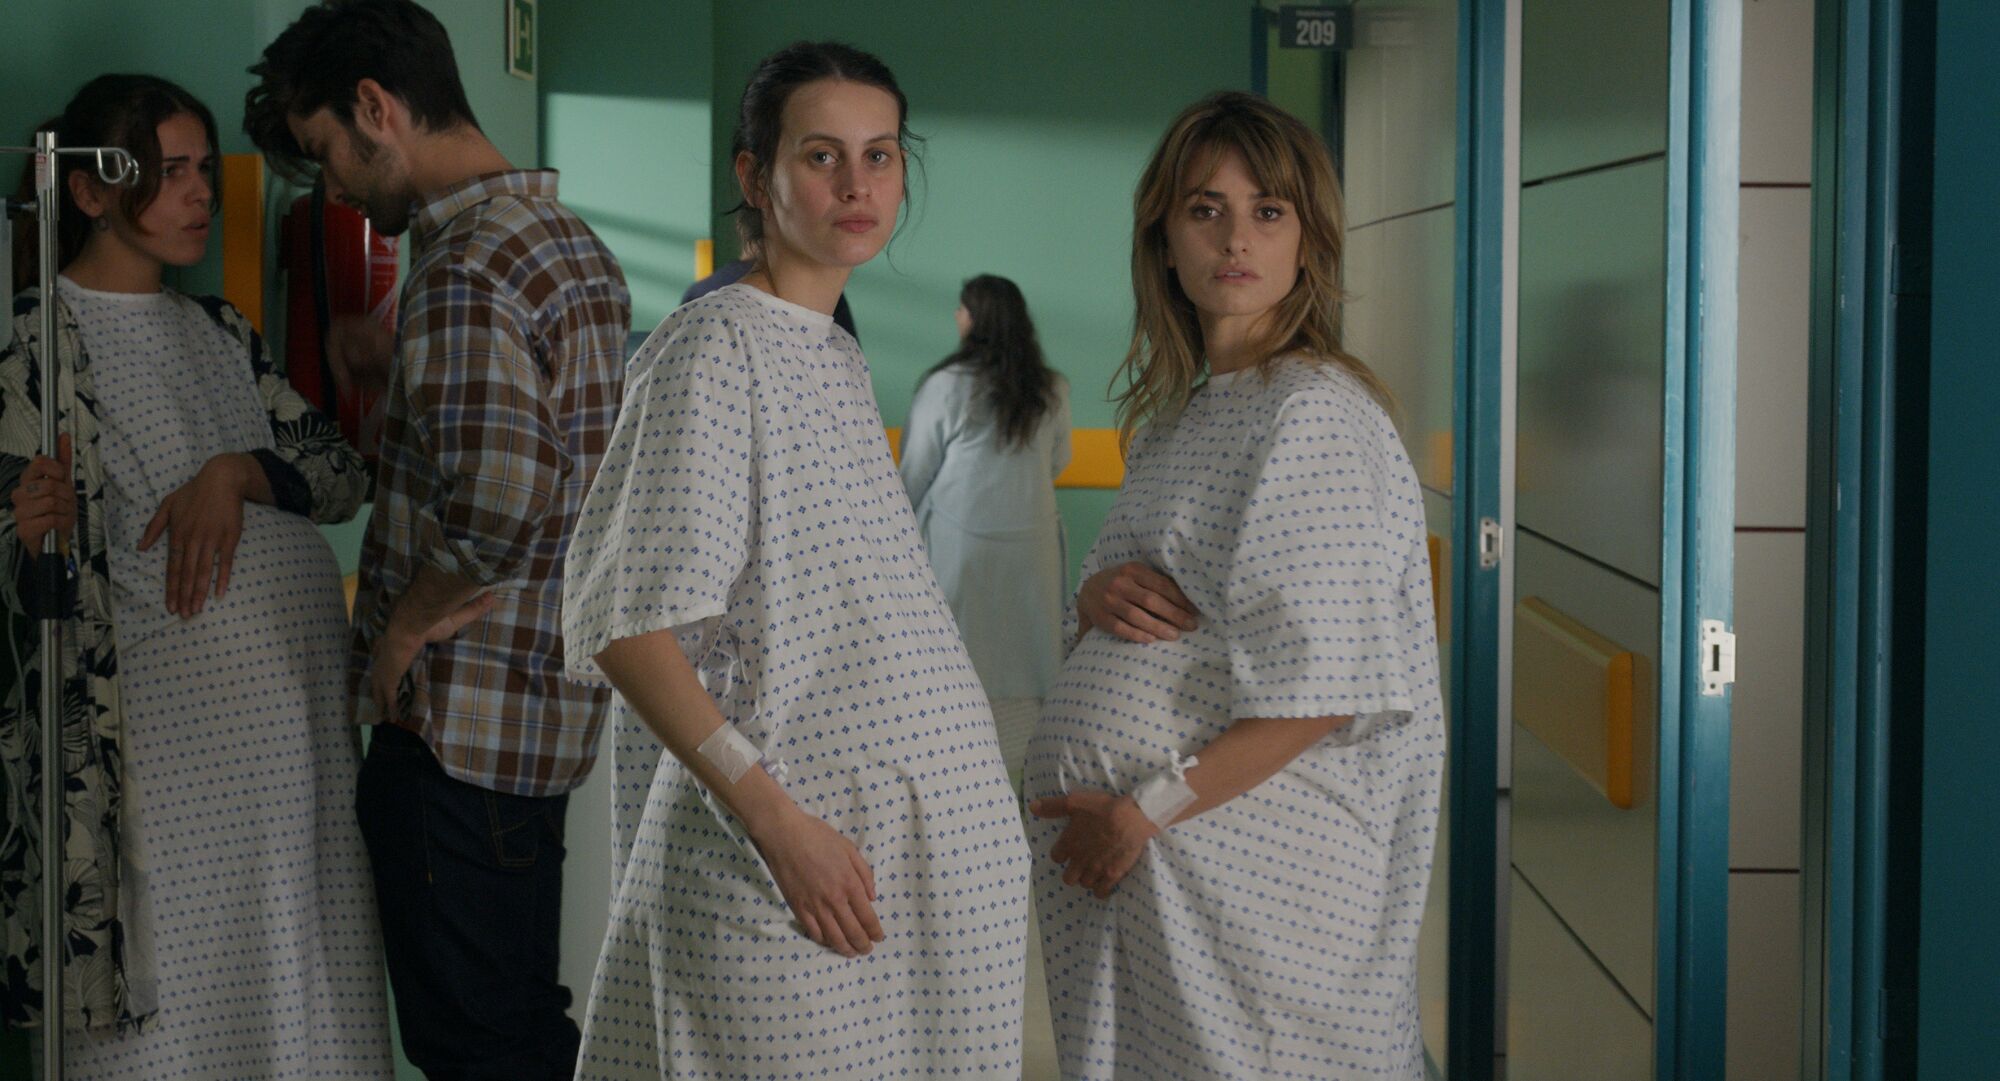 Two pregnant women in the hospital in "Parallel Mothers."